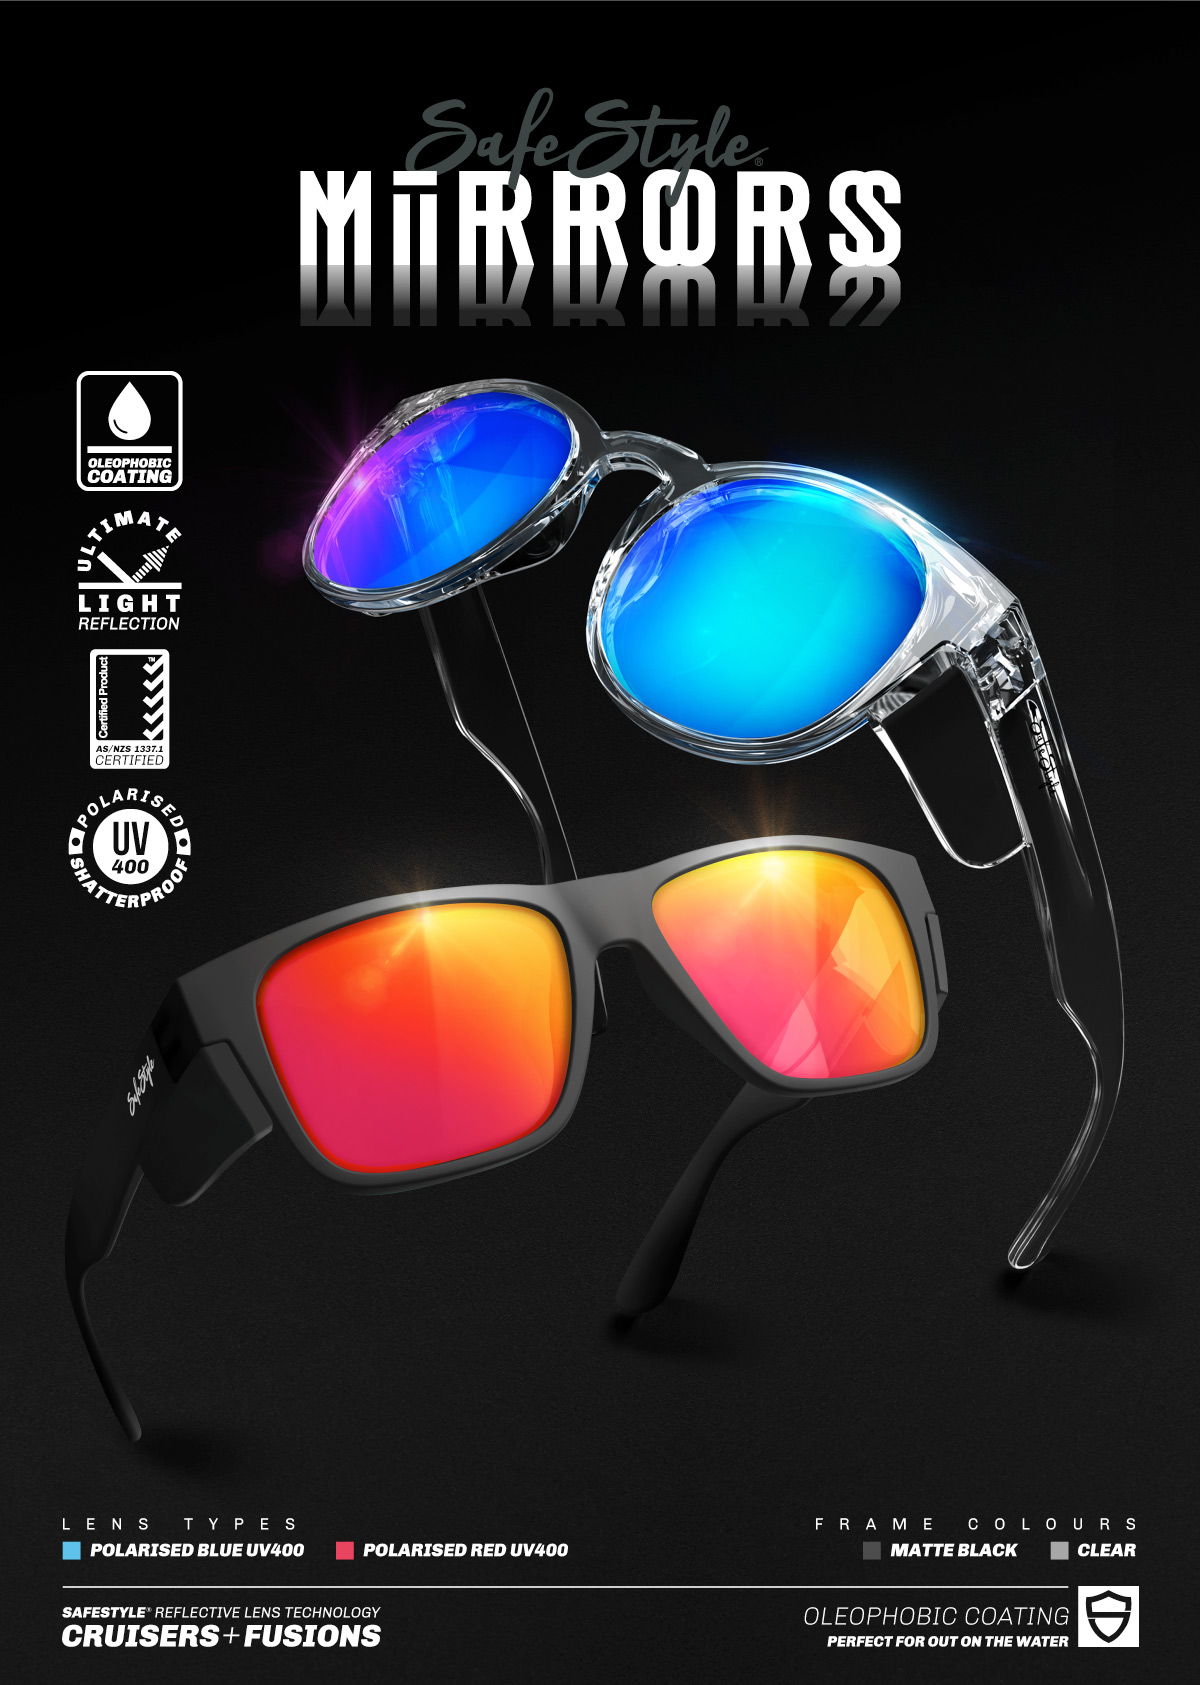 JUST LANDED  NEW sunglasses with advanced lens coating that